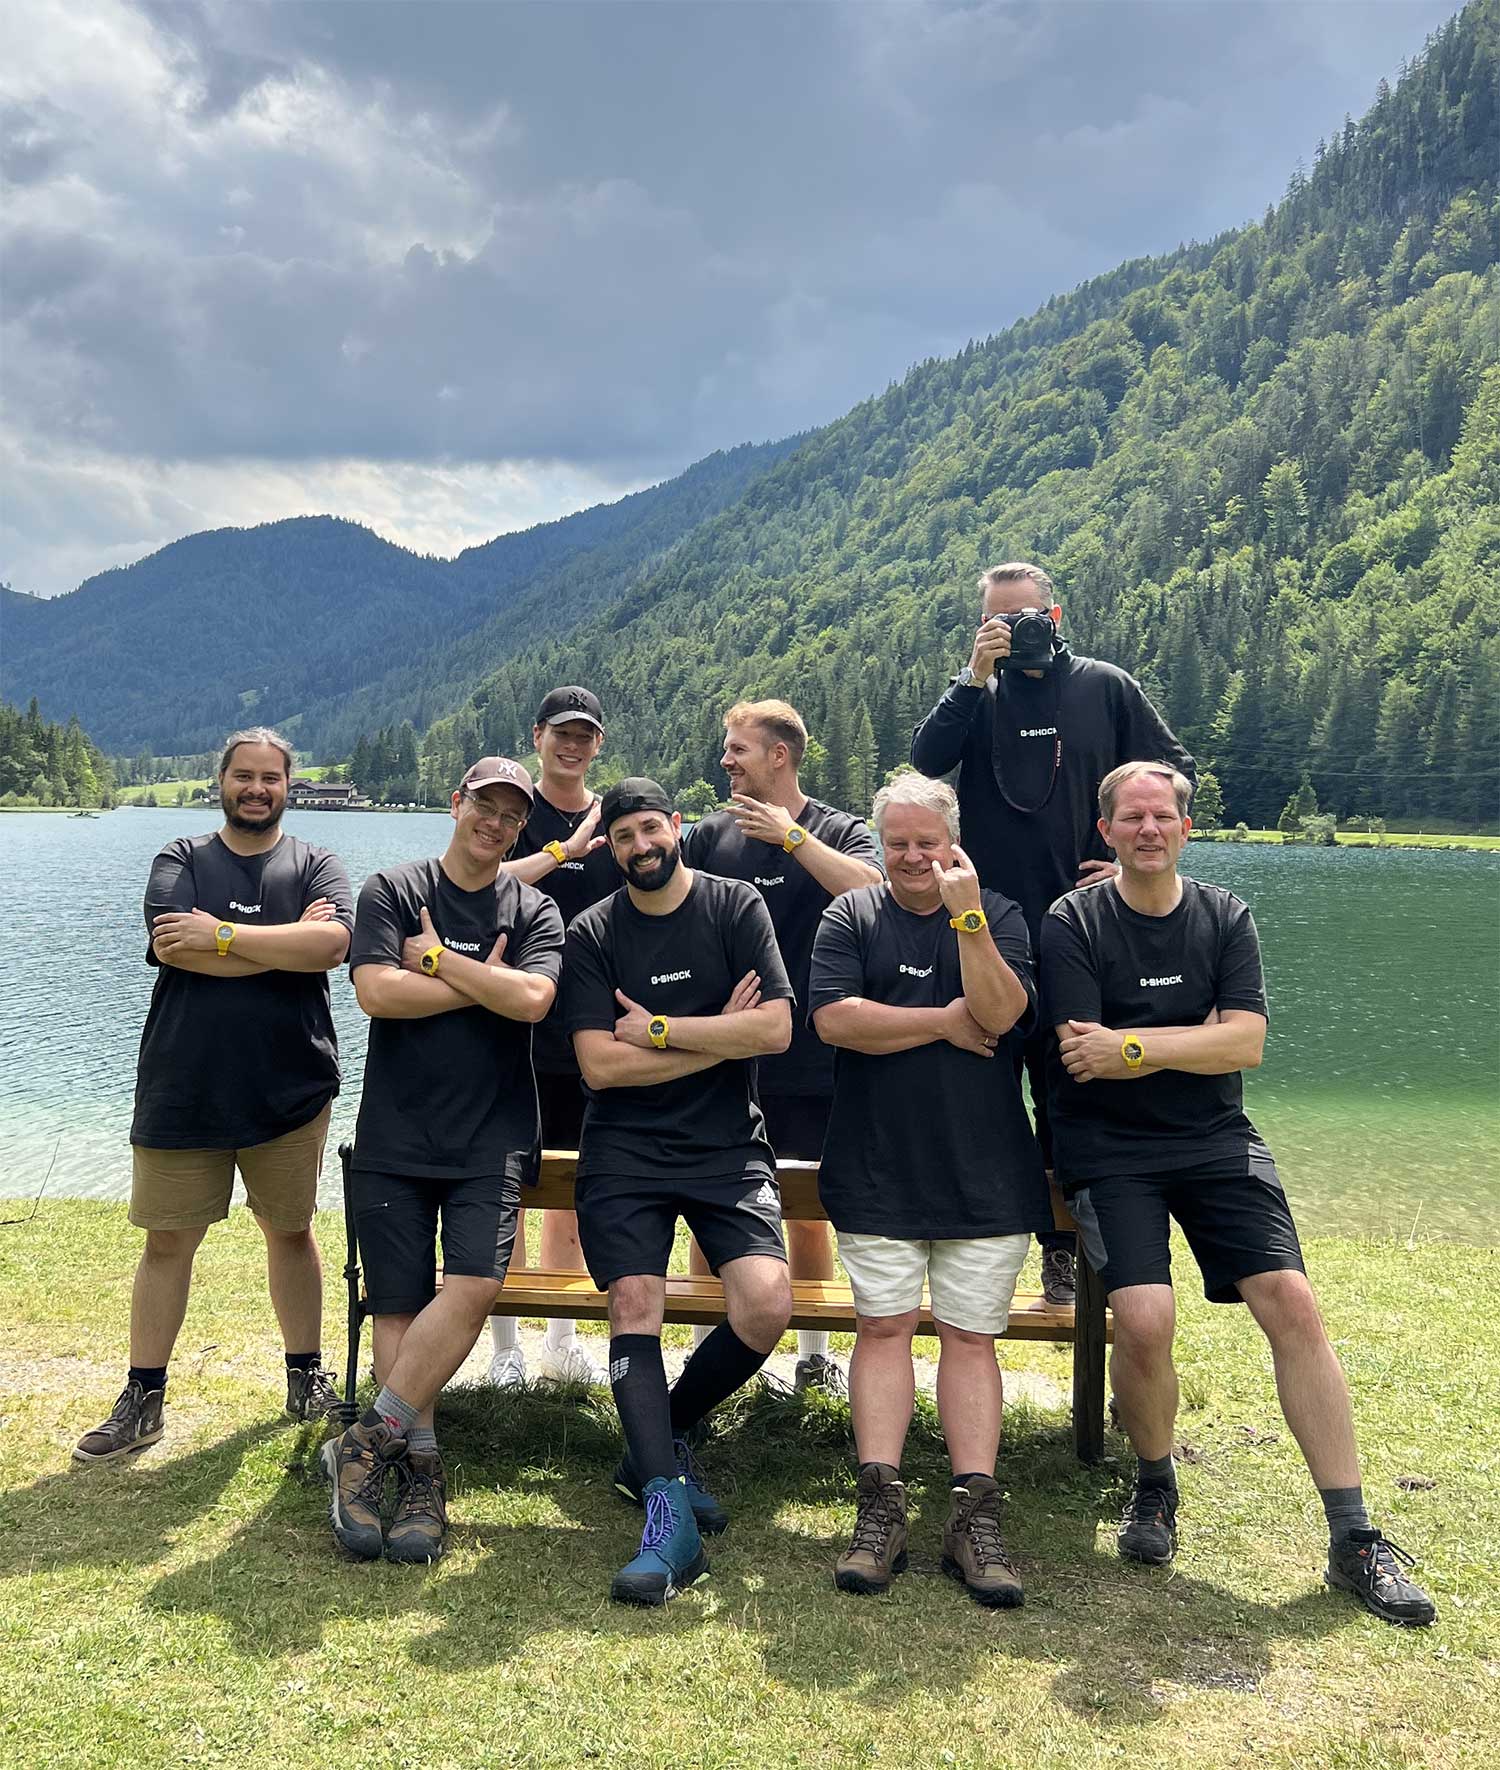 Cool G-SHOCK EXPERIENCE DAYS Team 2022 - Pillersee, Austria